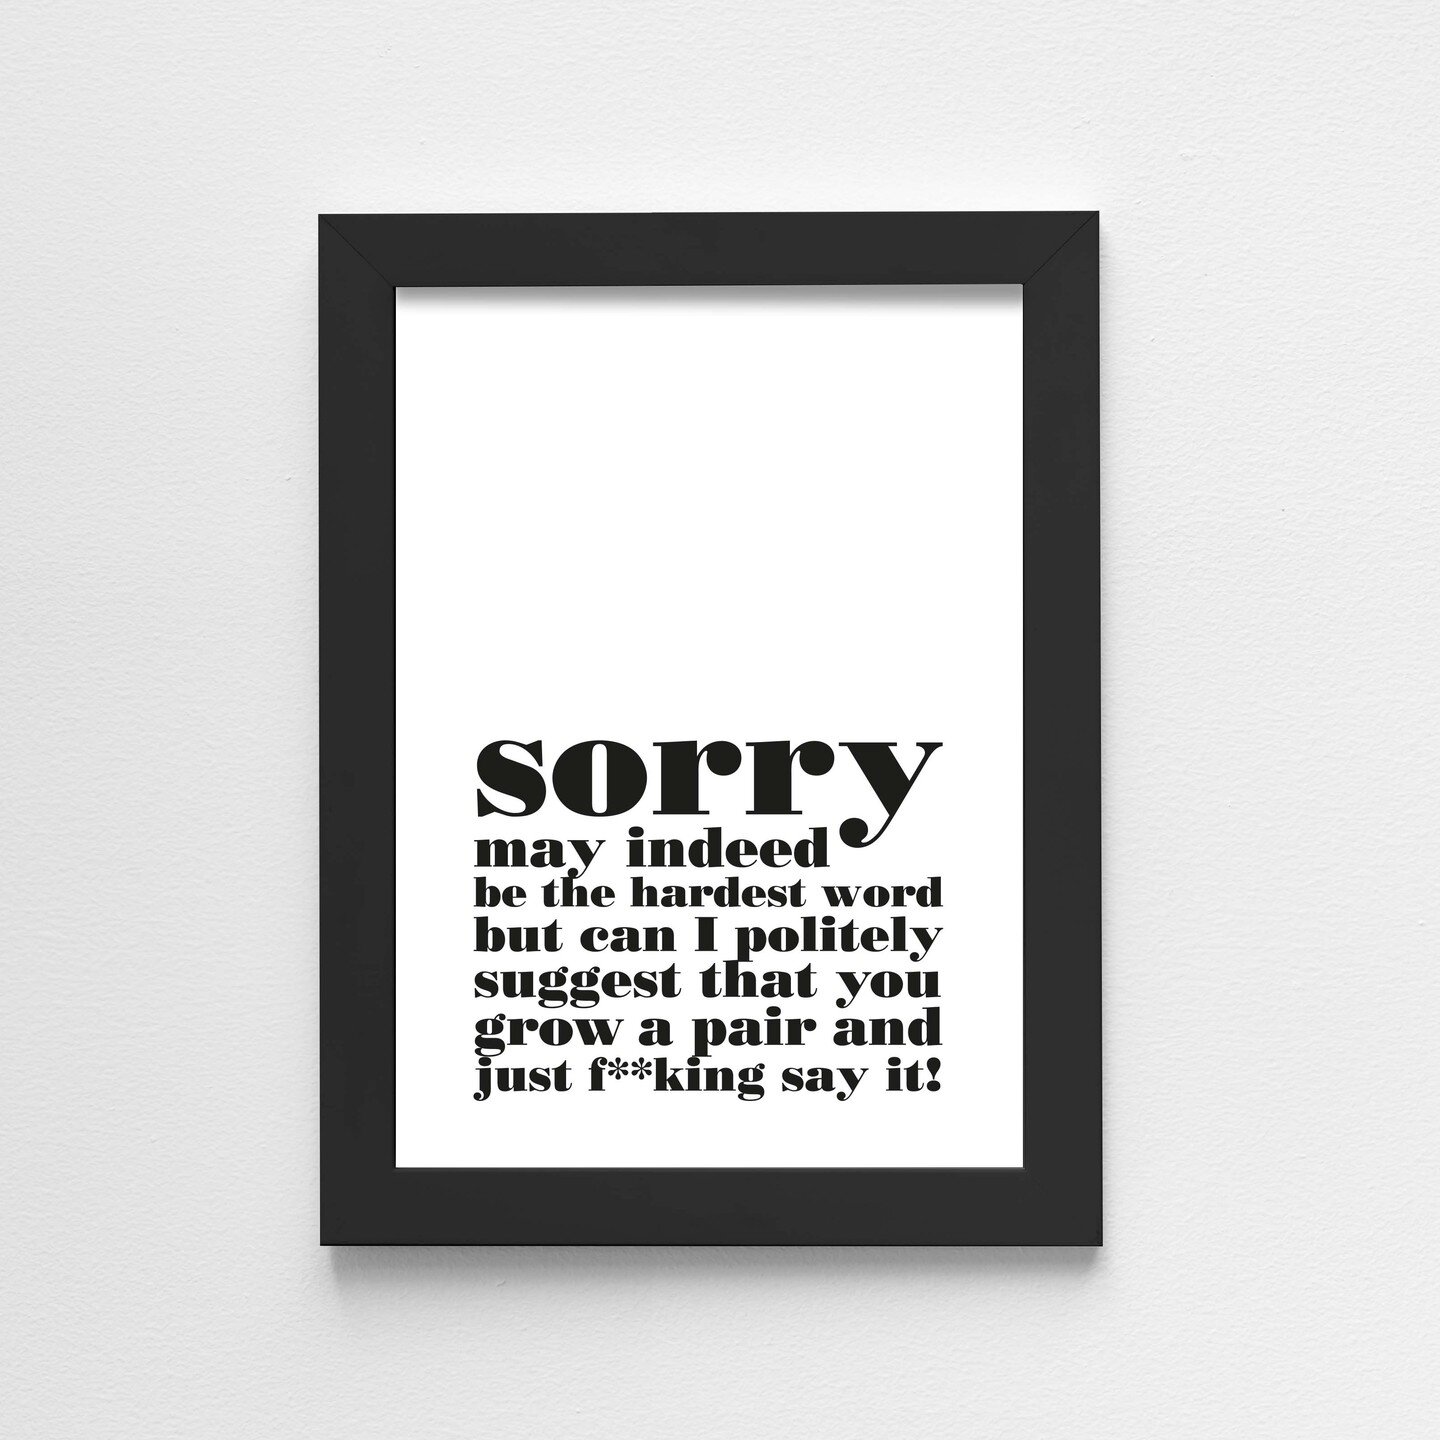 It's never too late! Prints and frames available at enardepy.co.uk 😜 #sorry #apology #apologyquotes #posters #prints #frames #enardepy #mono #wallart #funny